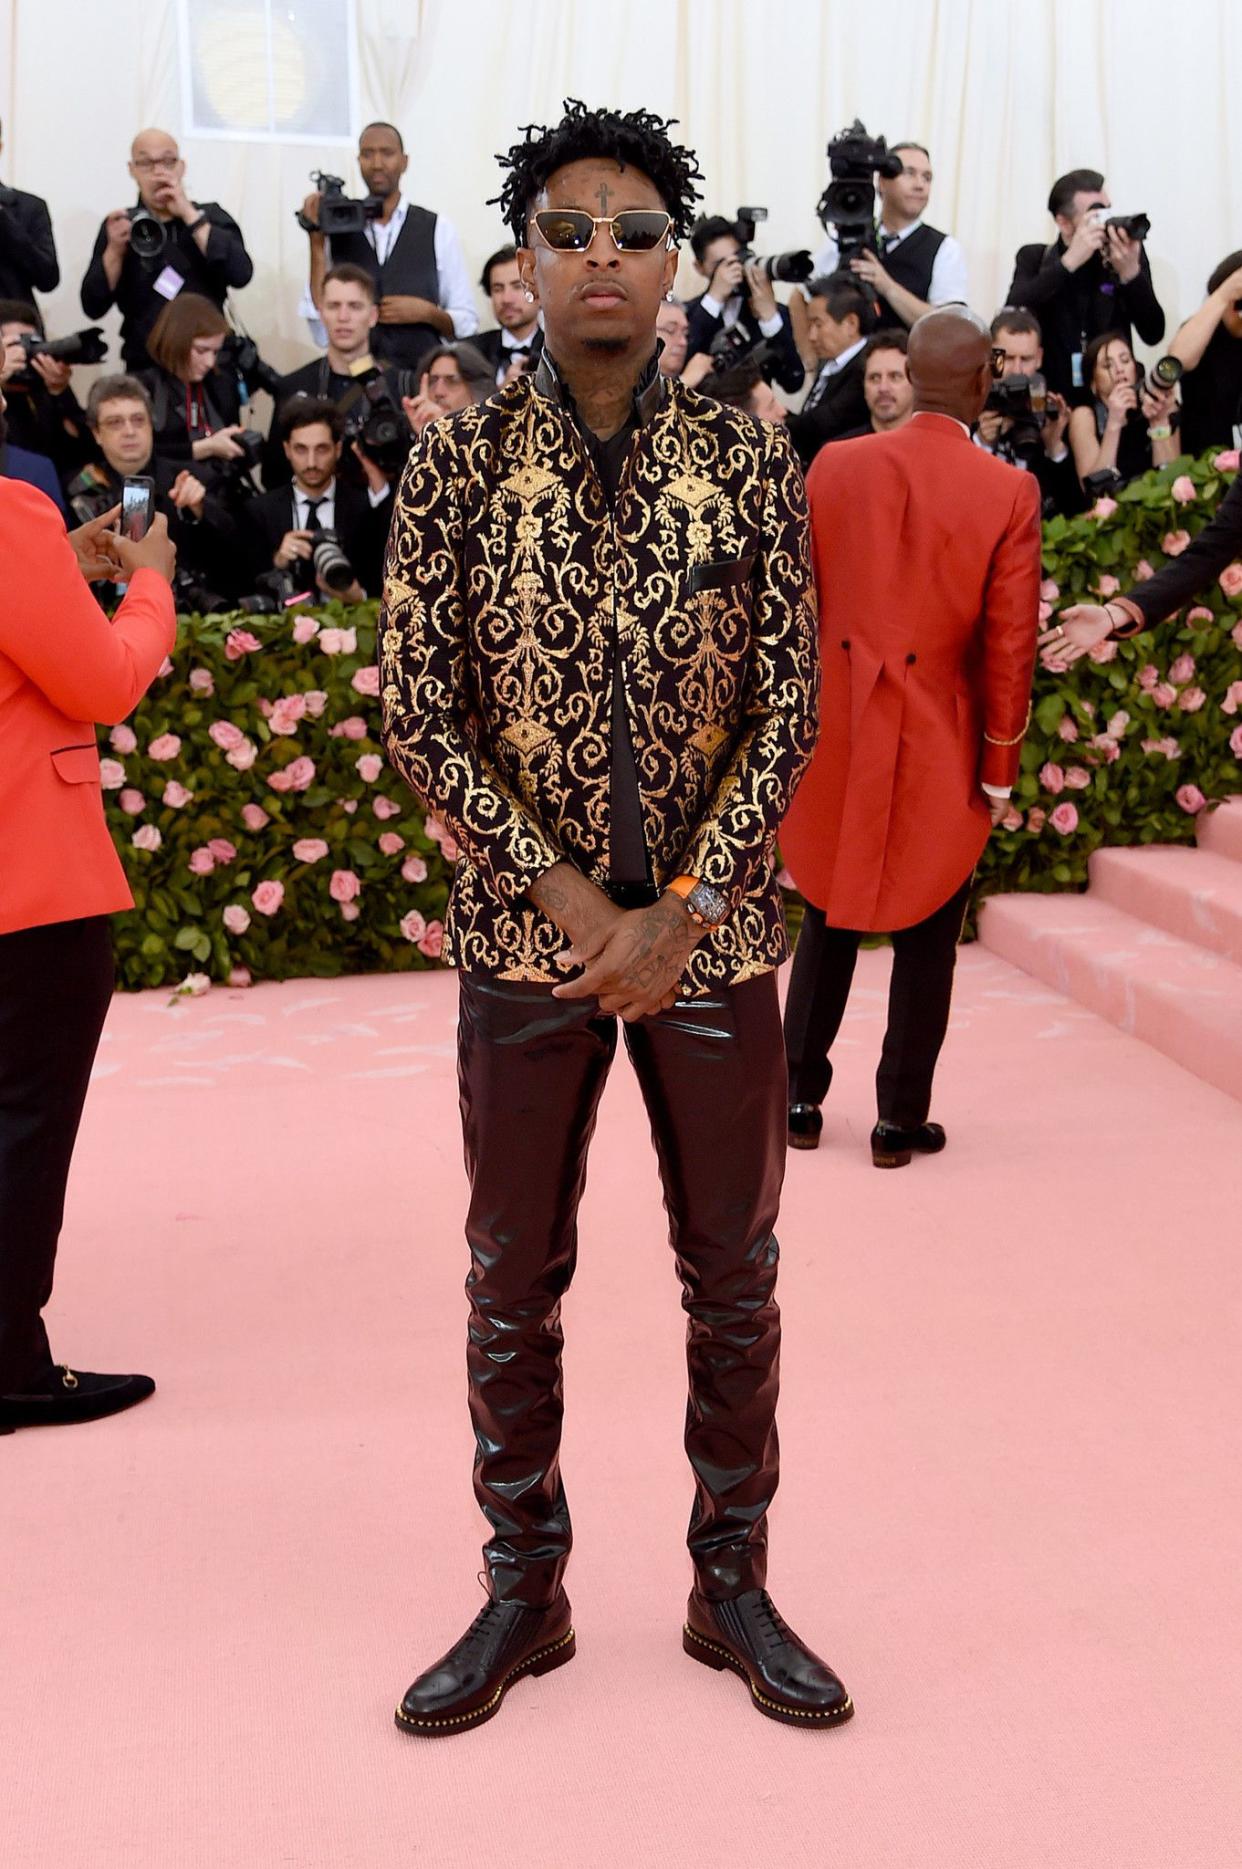 21 Savage attends The 2019 Met Gala Celebrating Camp: Notes on Fashion at Metropolitan Museum of Art on May 06, 2019 in New York City.